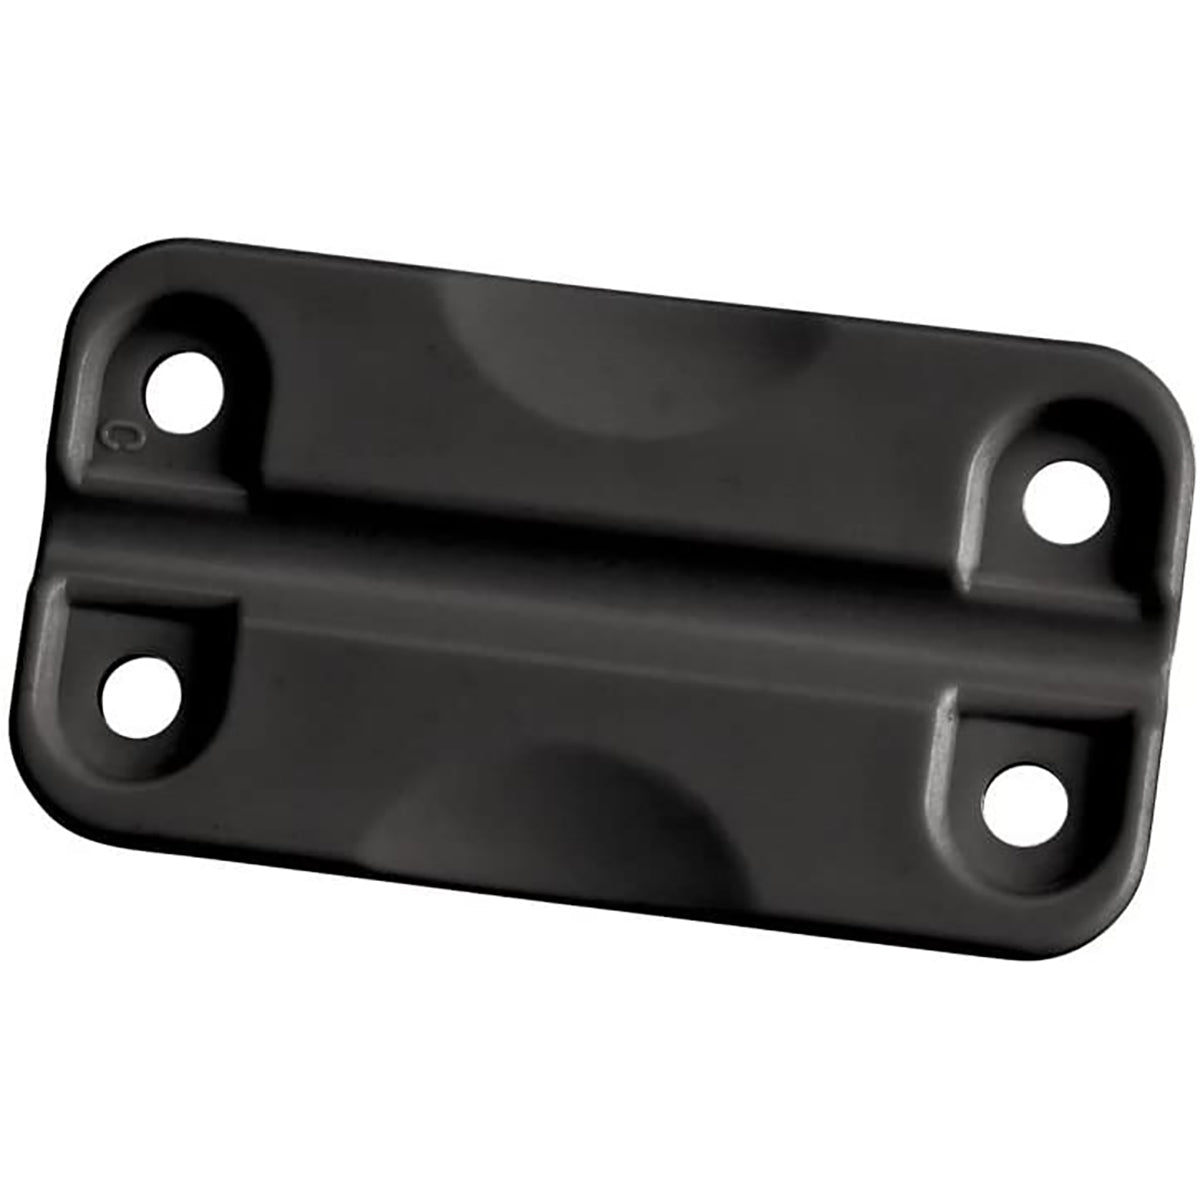 IGLOO Extended Life Riteflex Hinges for Coolers - Universal Fit - Black IGLOO